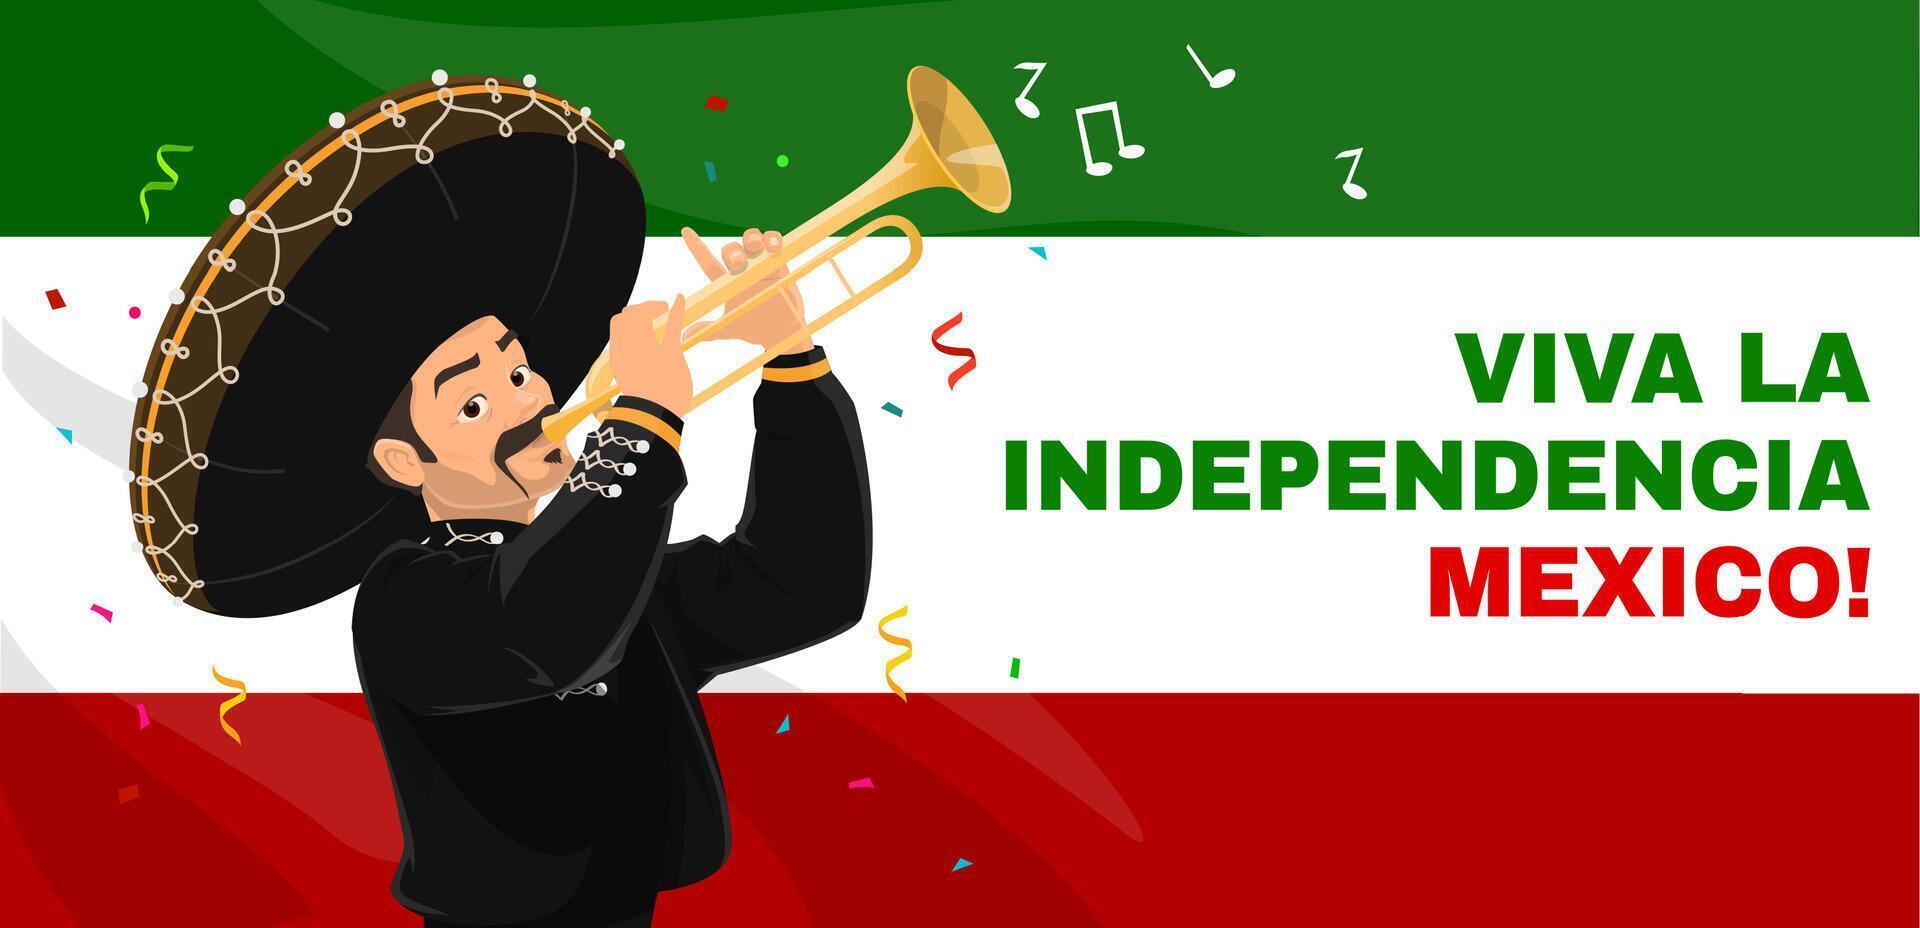 Independence day of Mexico banner with mariachi vector